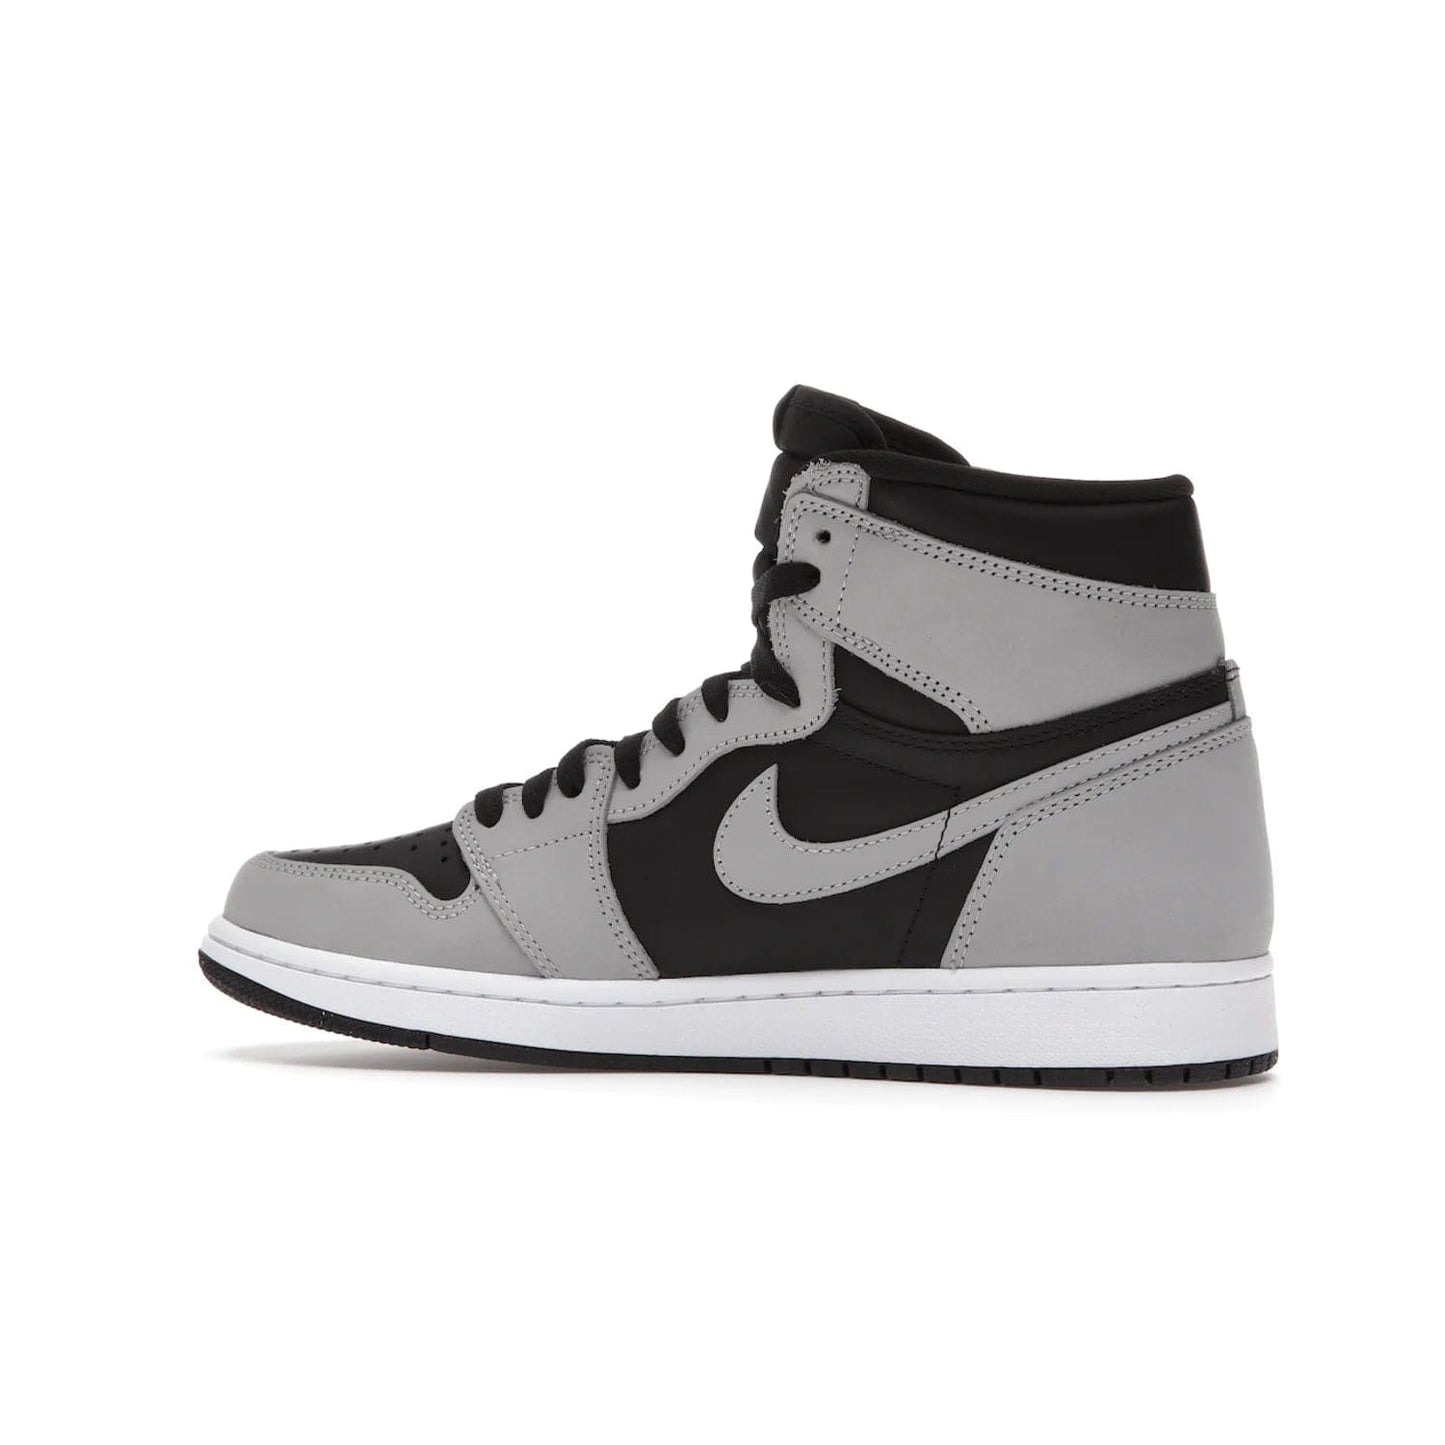 Jordan 1 Retro High Shadow 2.0 - Image 21 - Only at www.BallersClubKickz.com - #
Classic Air Jordan 1 Retro High Shadow 2.0 with black leather base and Light Smoke Grey overlays. Released in May 2021.